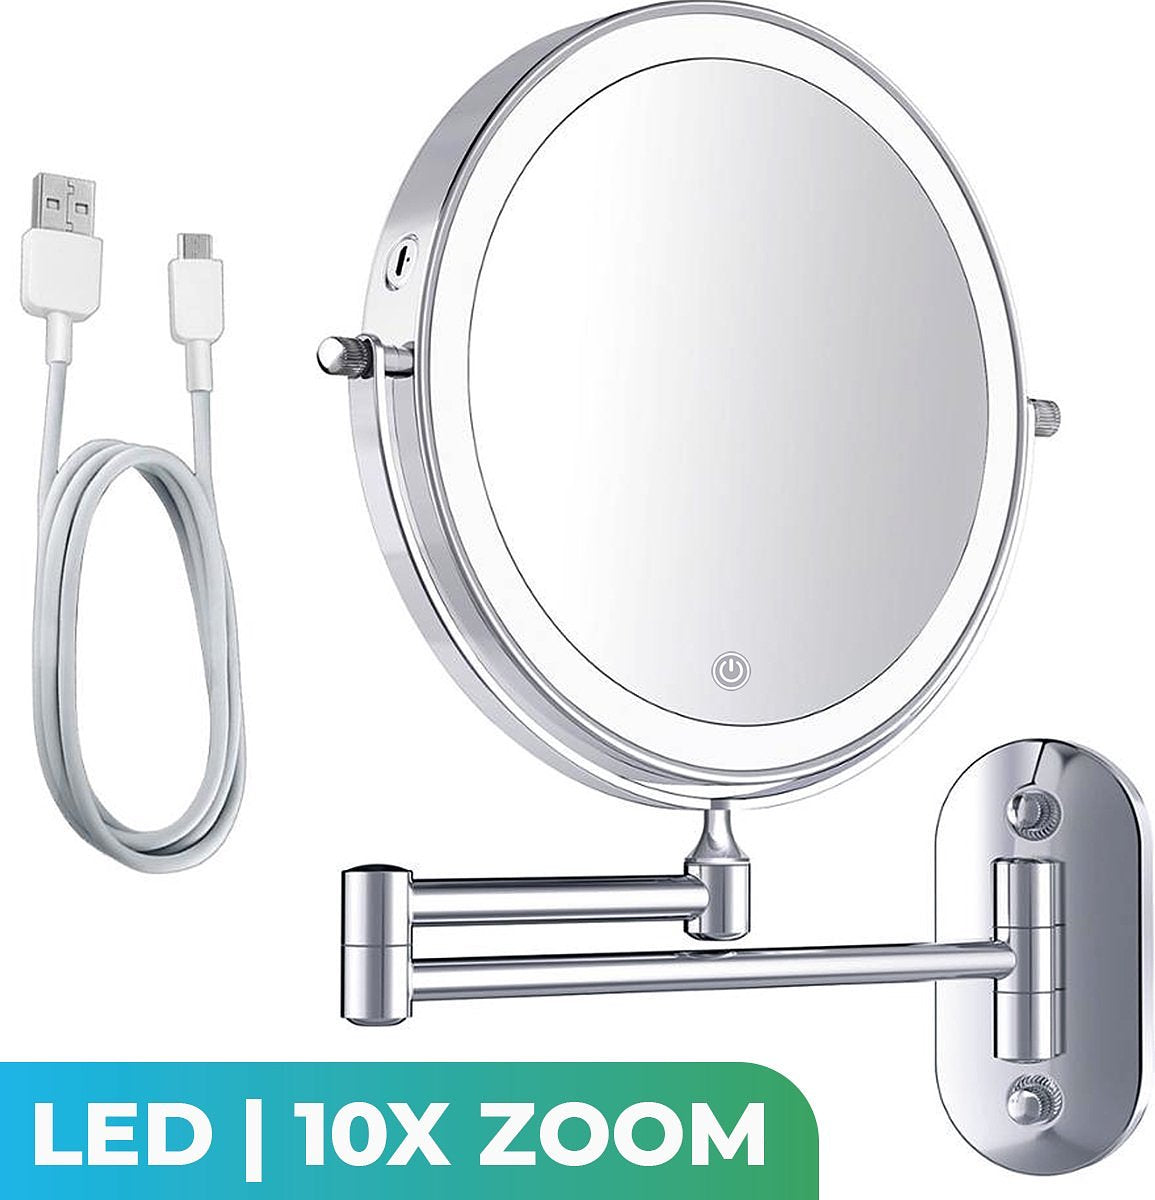 Mirlux Make Up Mirror with LED Lighting - 10X Magnification - Round Wall Mirror - Chrome